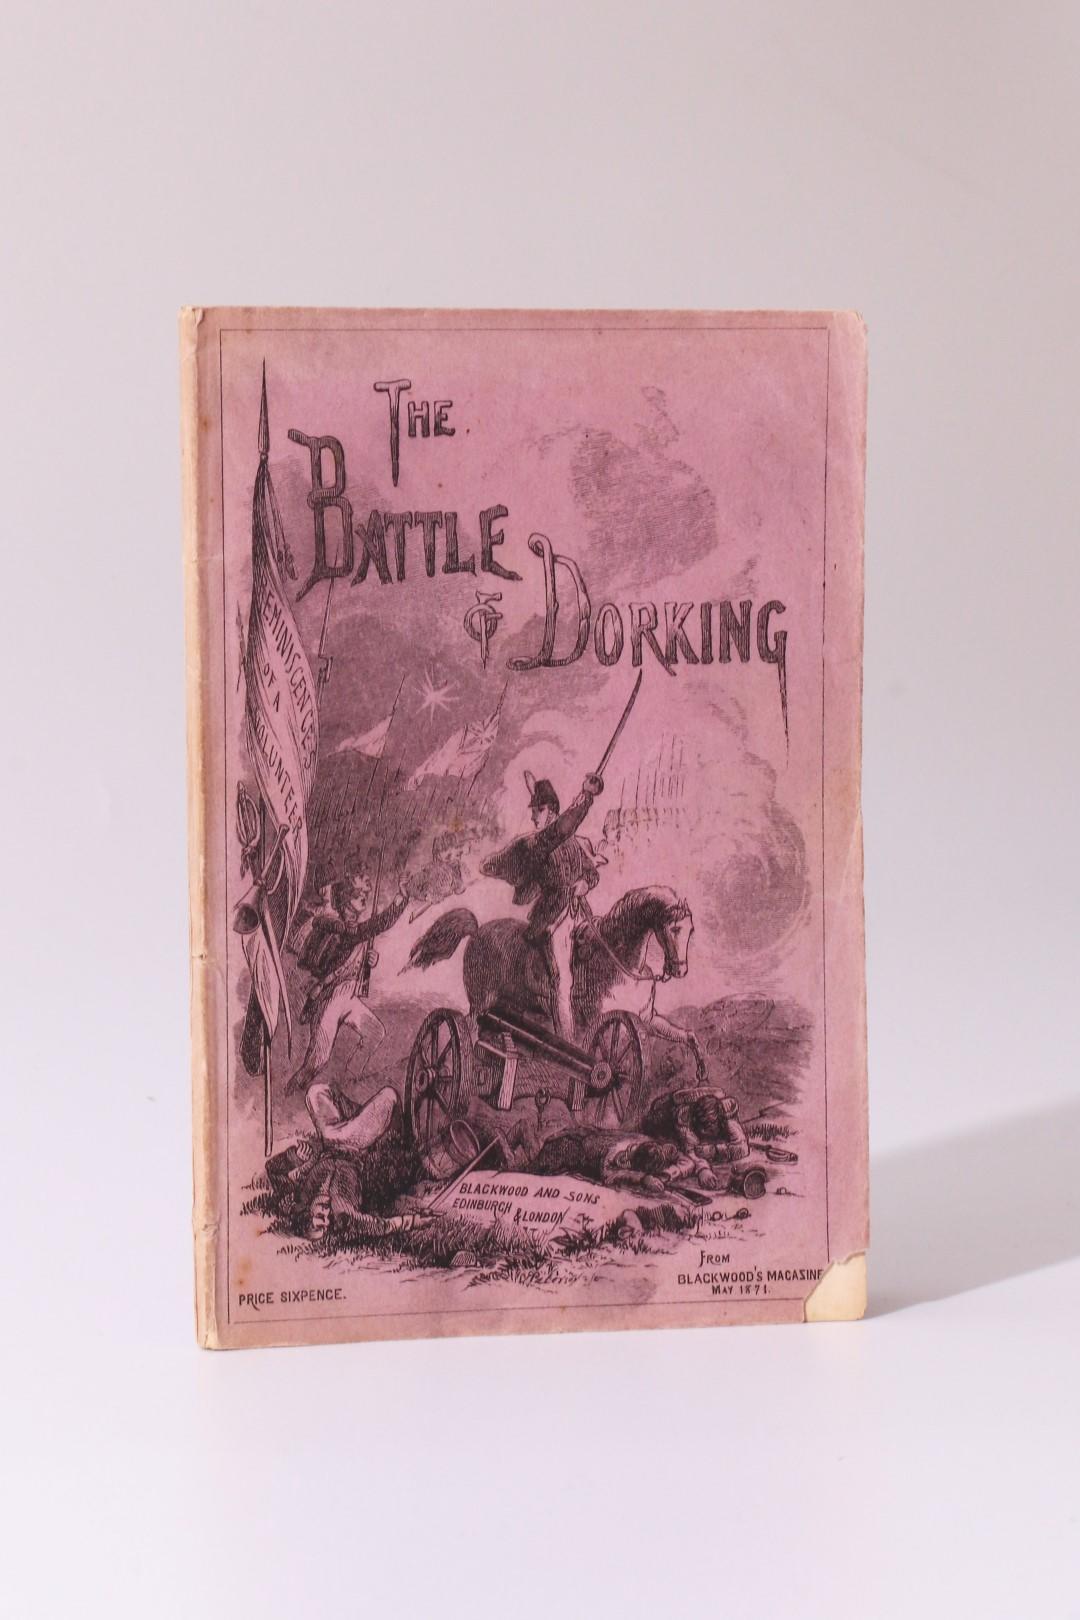 Anonymous [Sir George Chesney] - The Battle of Dorking - William Blackwood & Sons, 1871, First Thus.